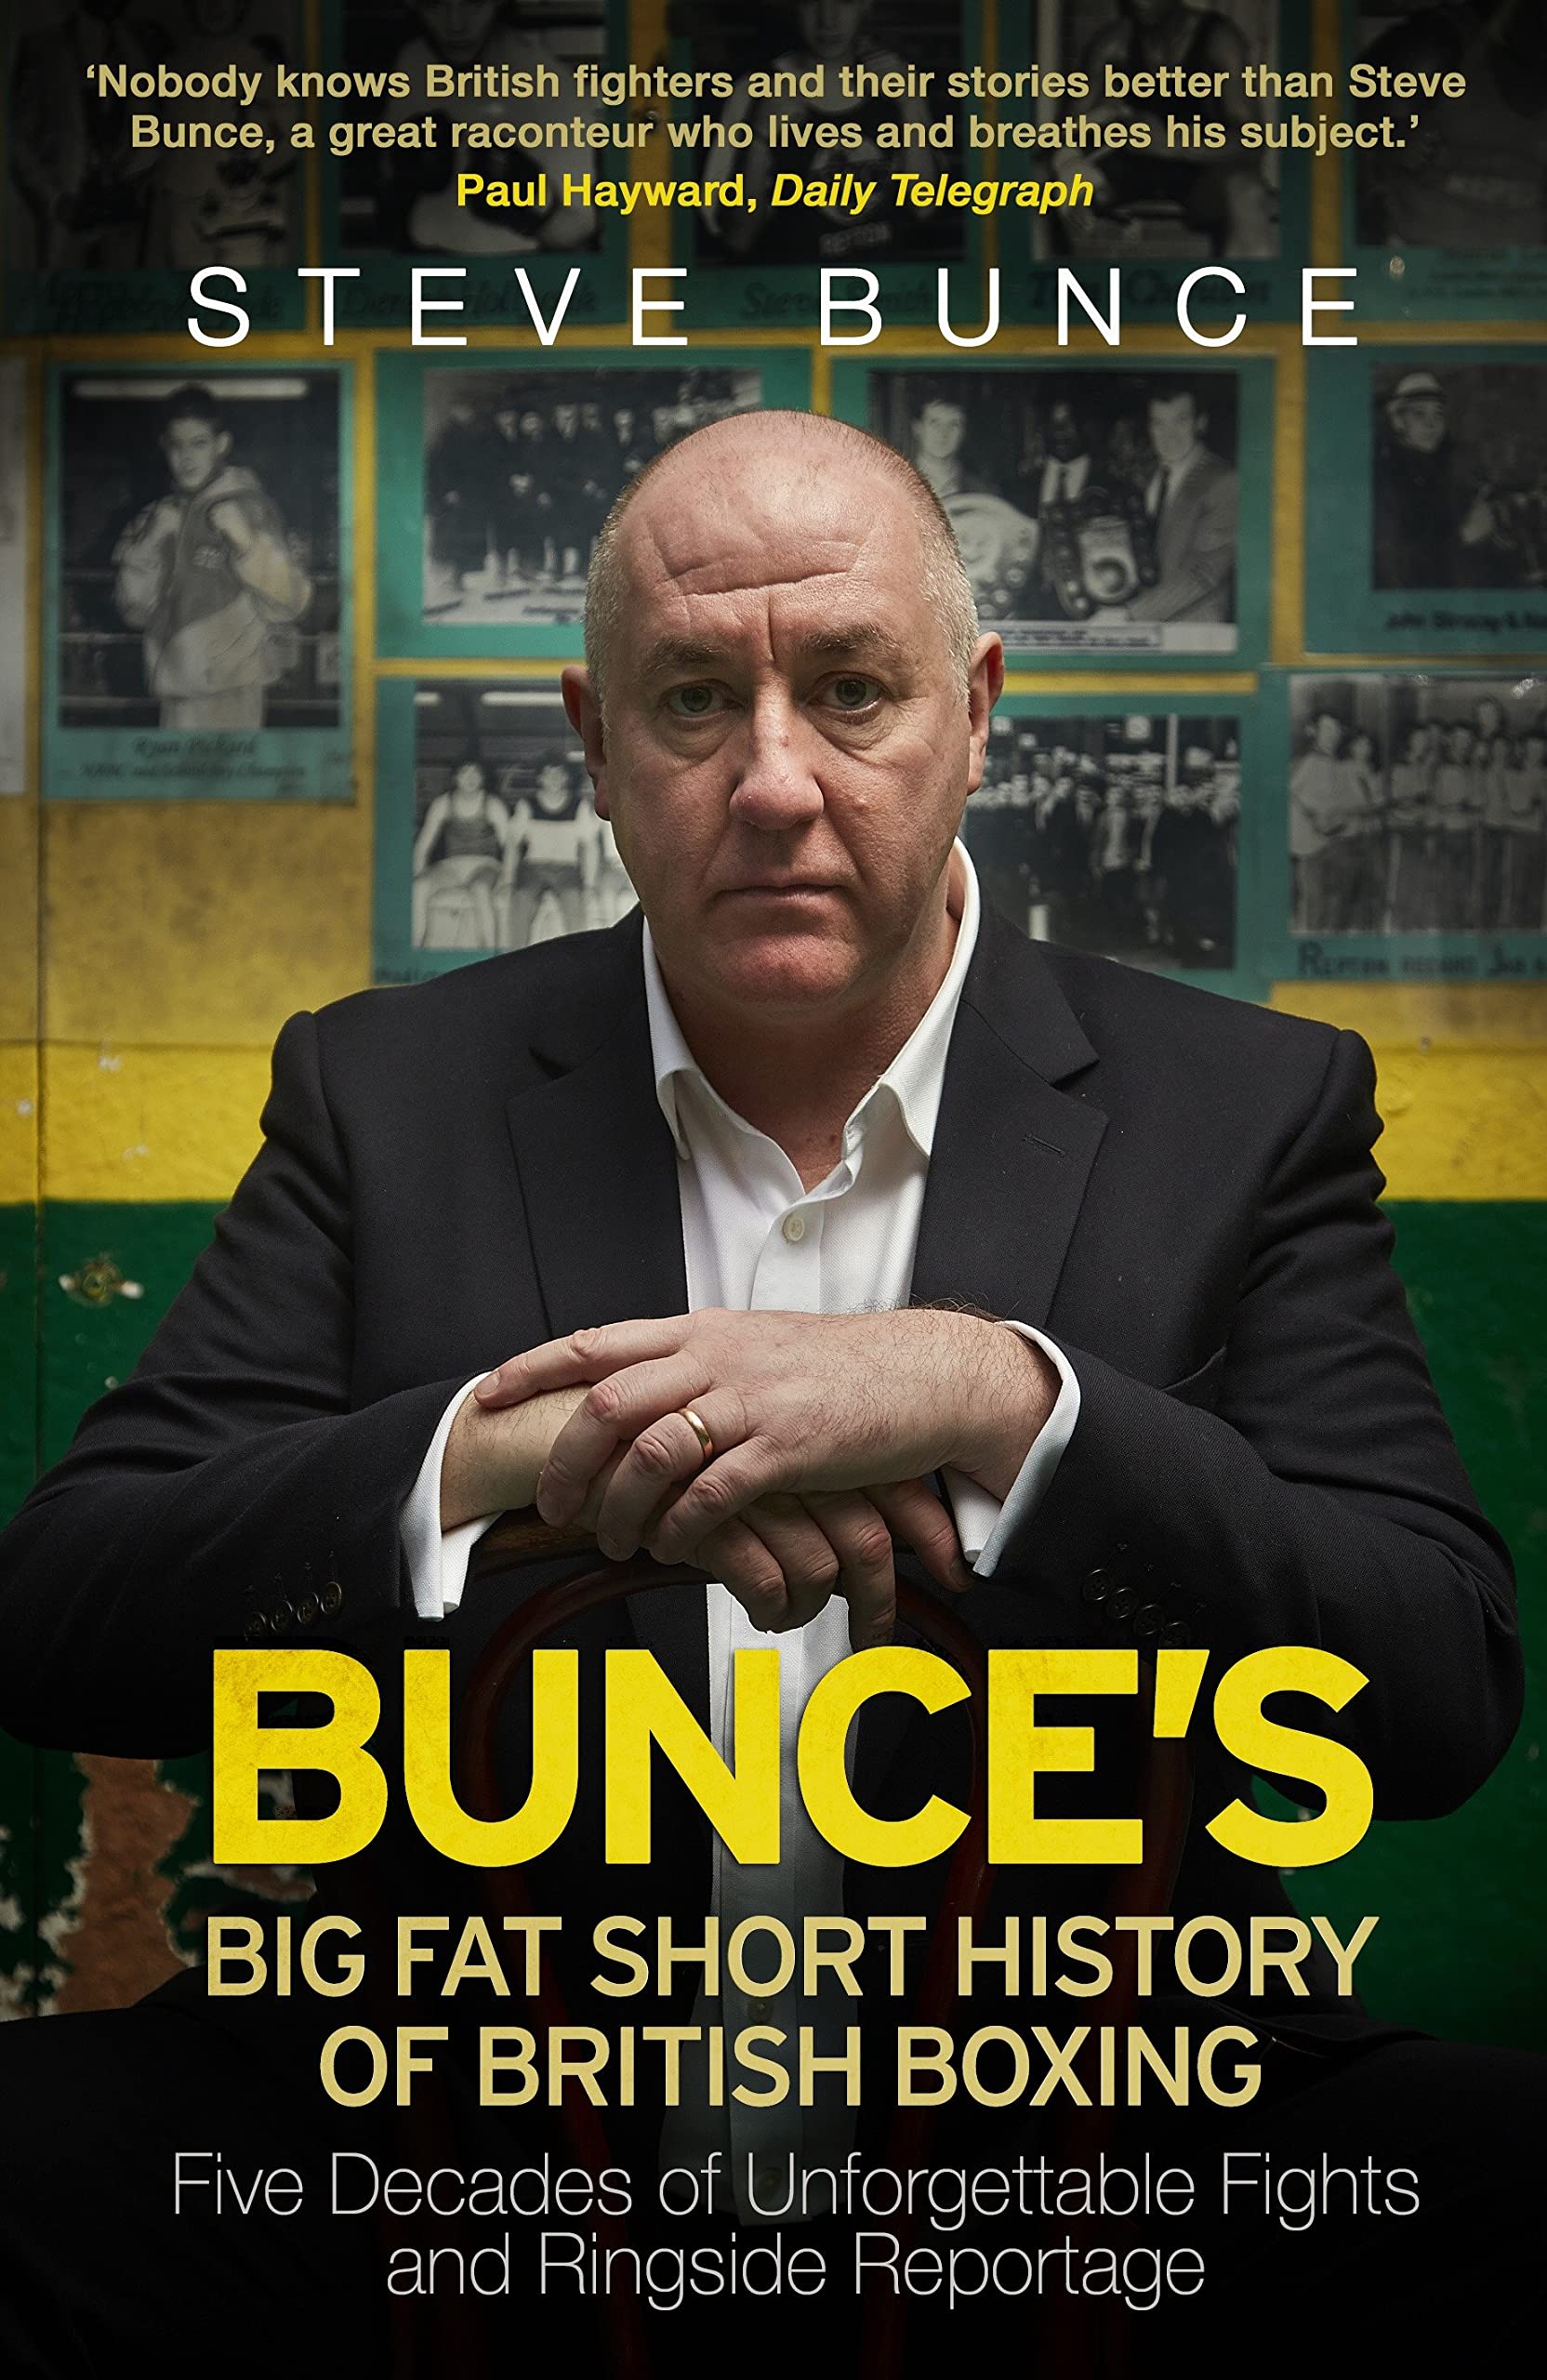 Bunce's Big Fat Short History of British Boxing by Steve Bunce.